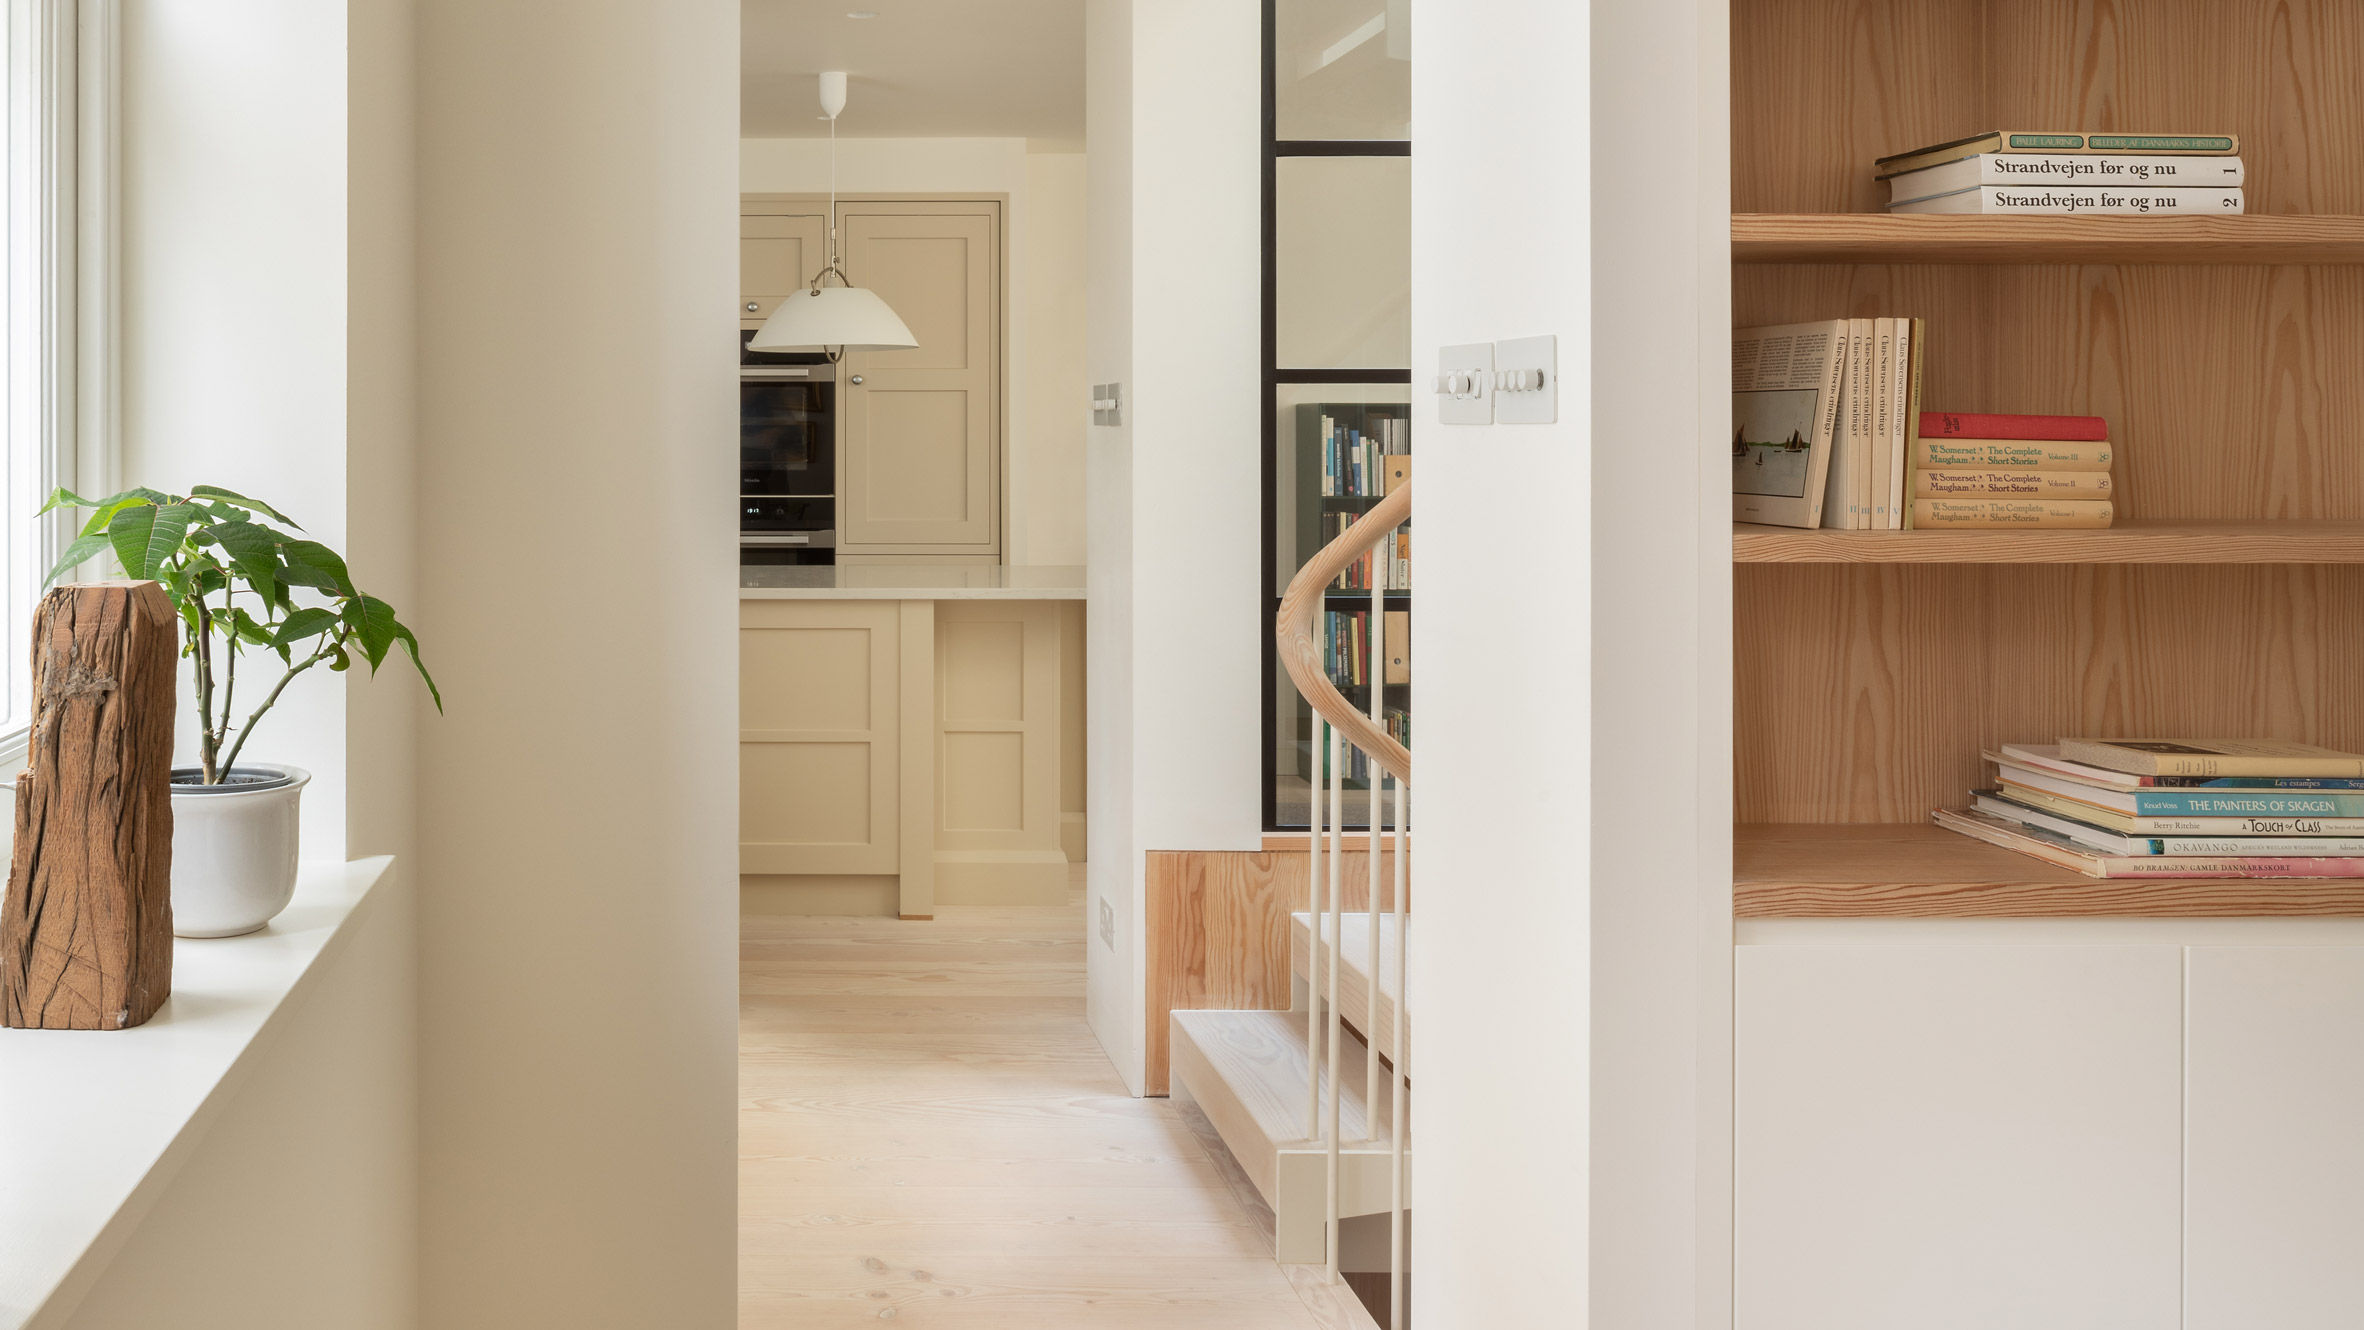 View of a bookshelf, staircase and kitchen on the interior of Danish Mews House by Neil Dusheiko Architects